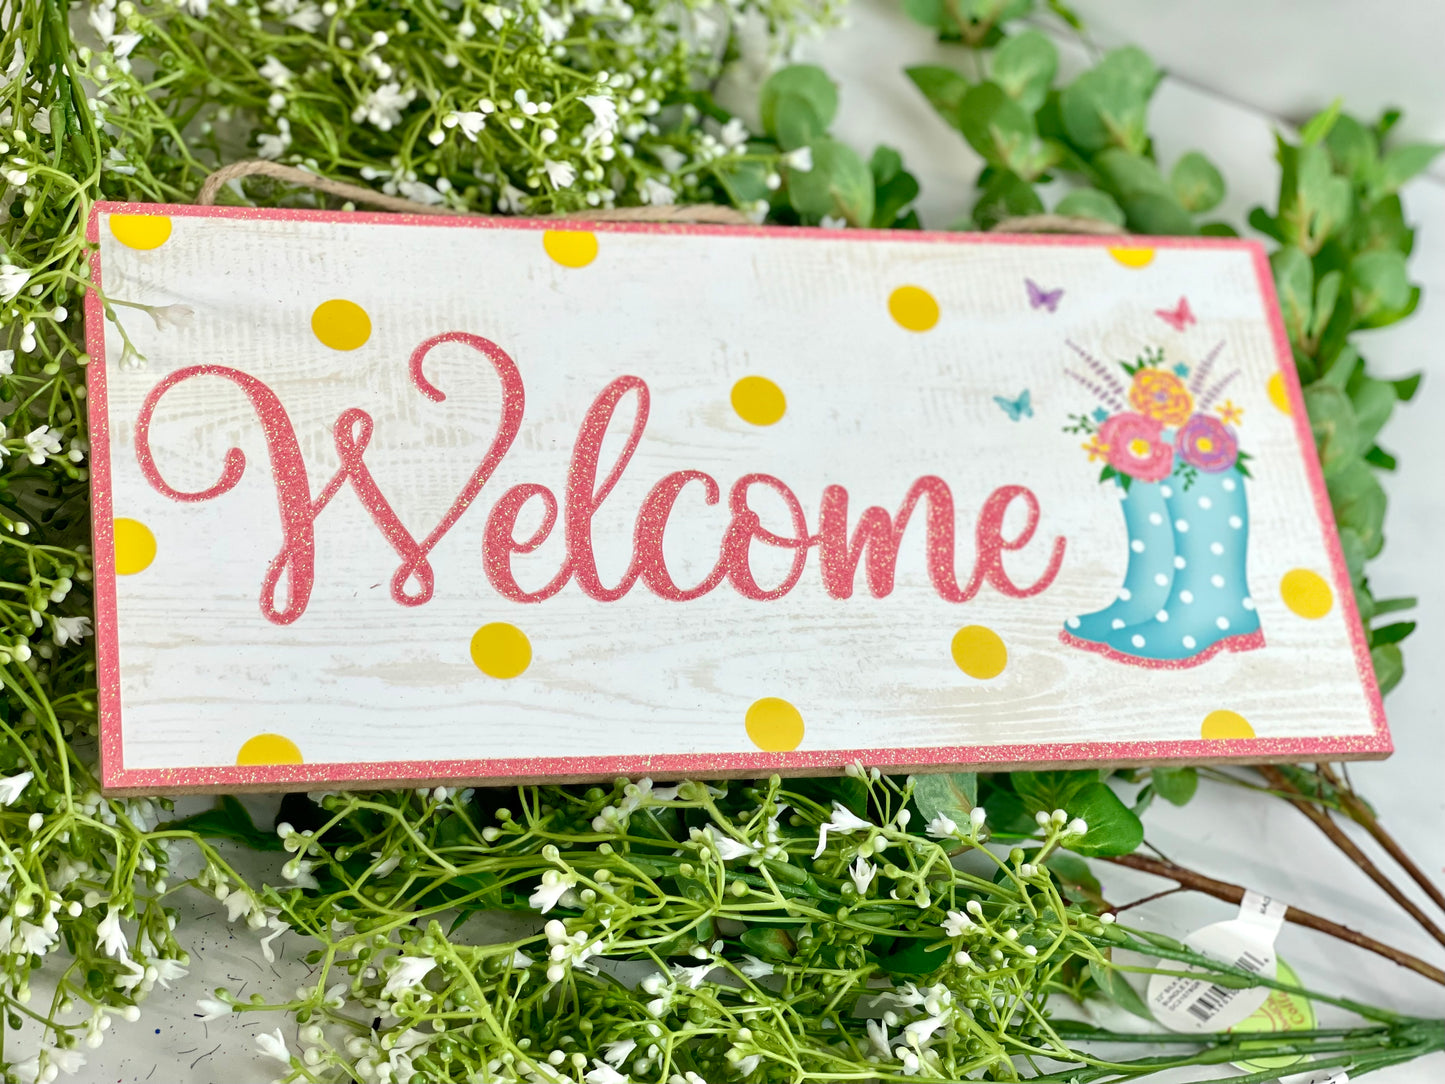 Welcome Glitter Boots Wooden Sign